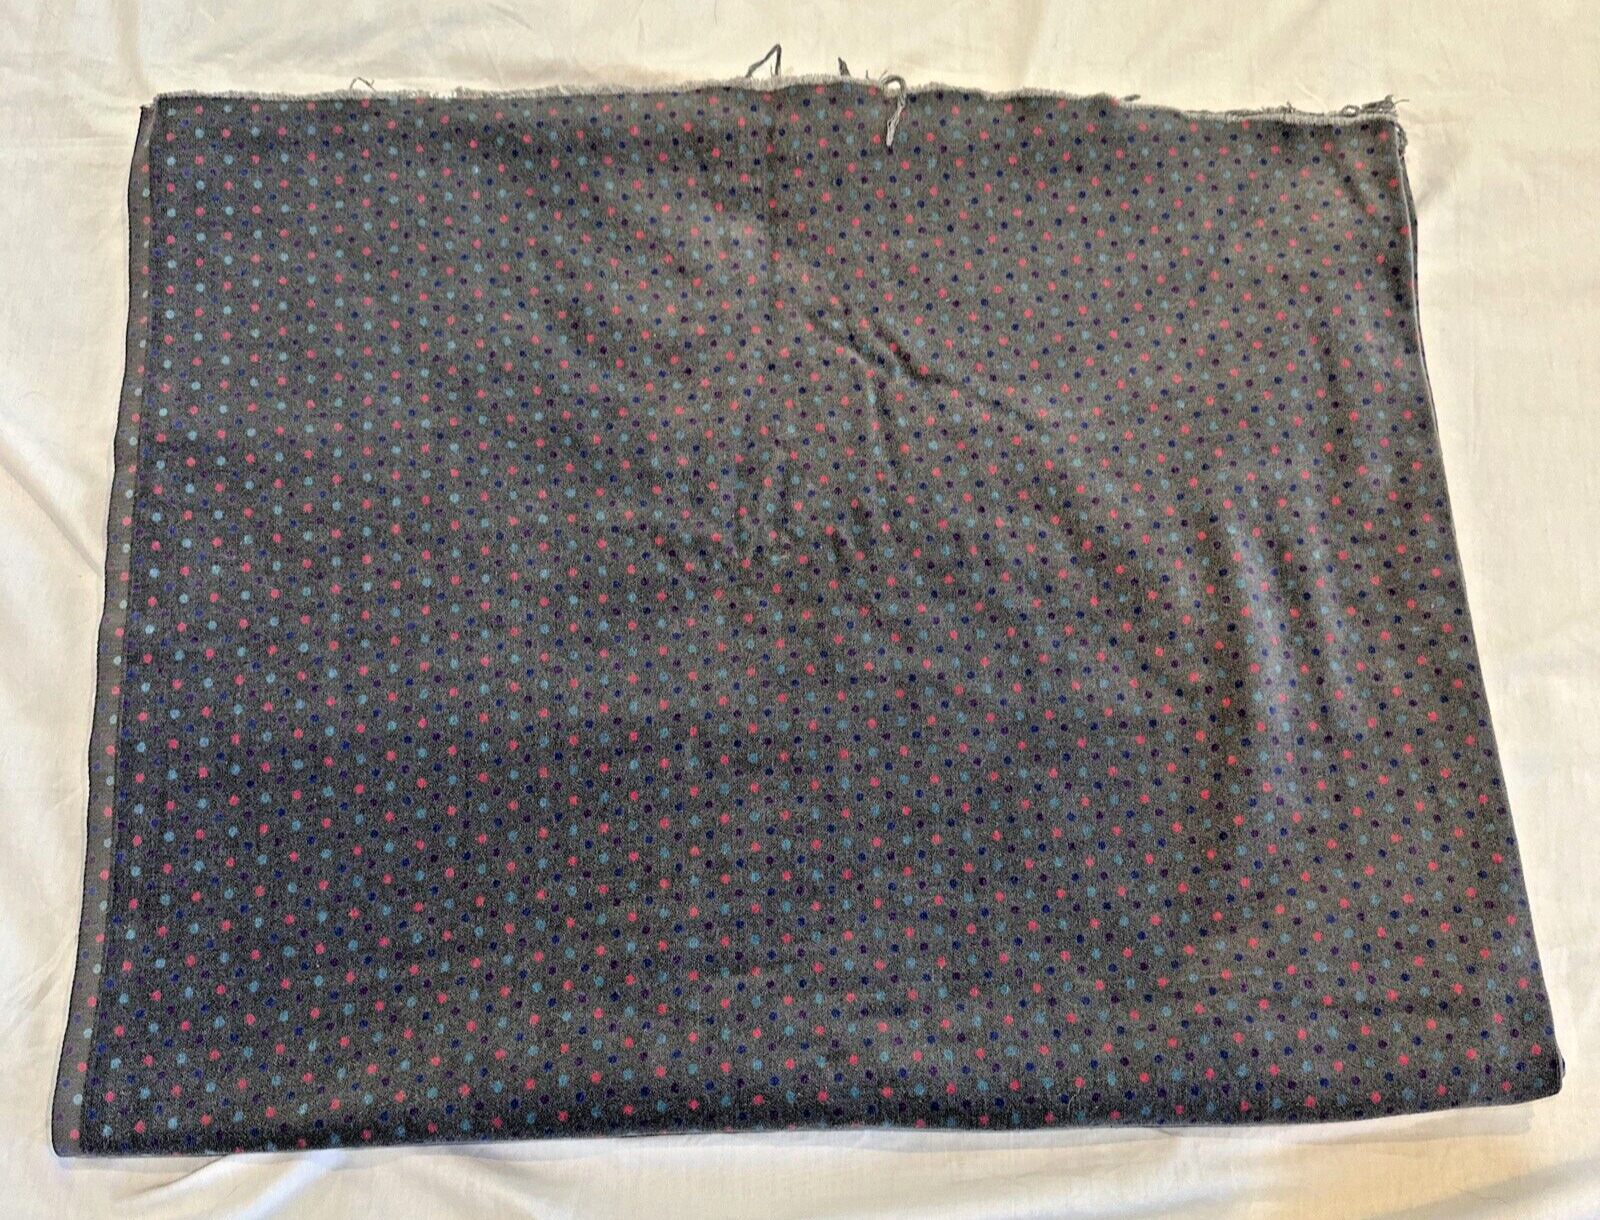 Vintage Crushed Velvet Gray Polka Dot 68X42 Fabric Quilting Craft Upholstery